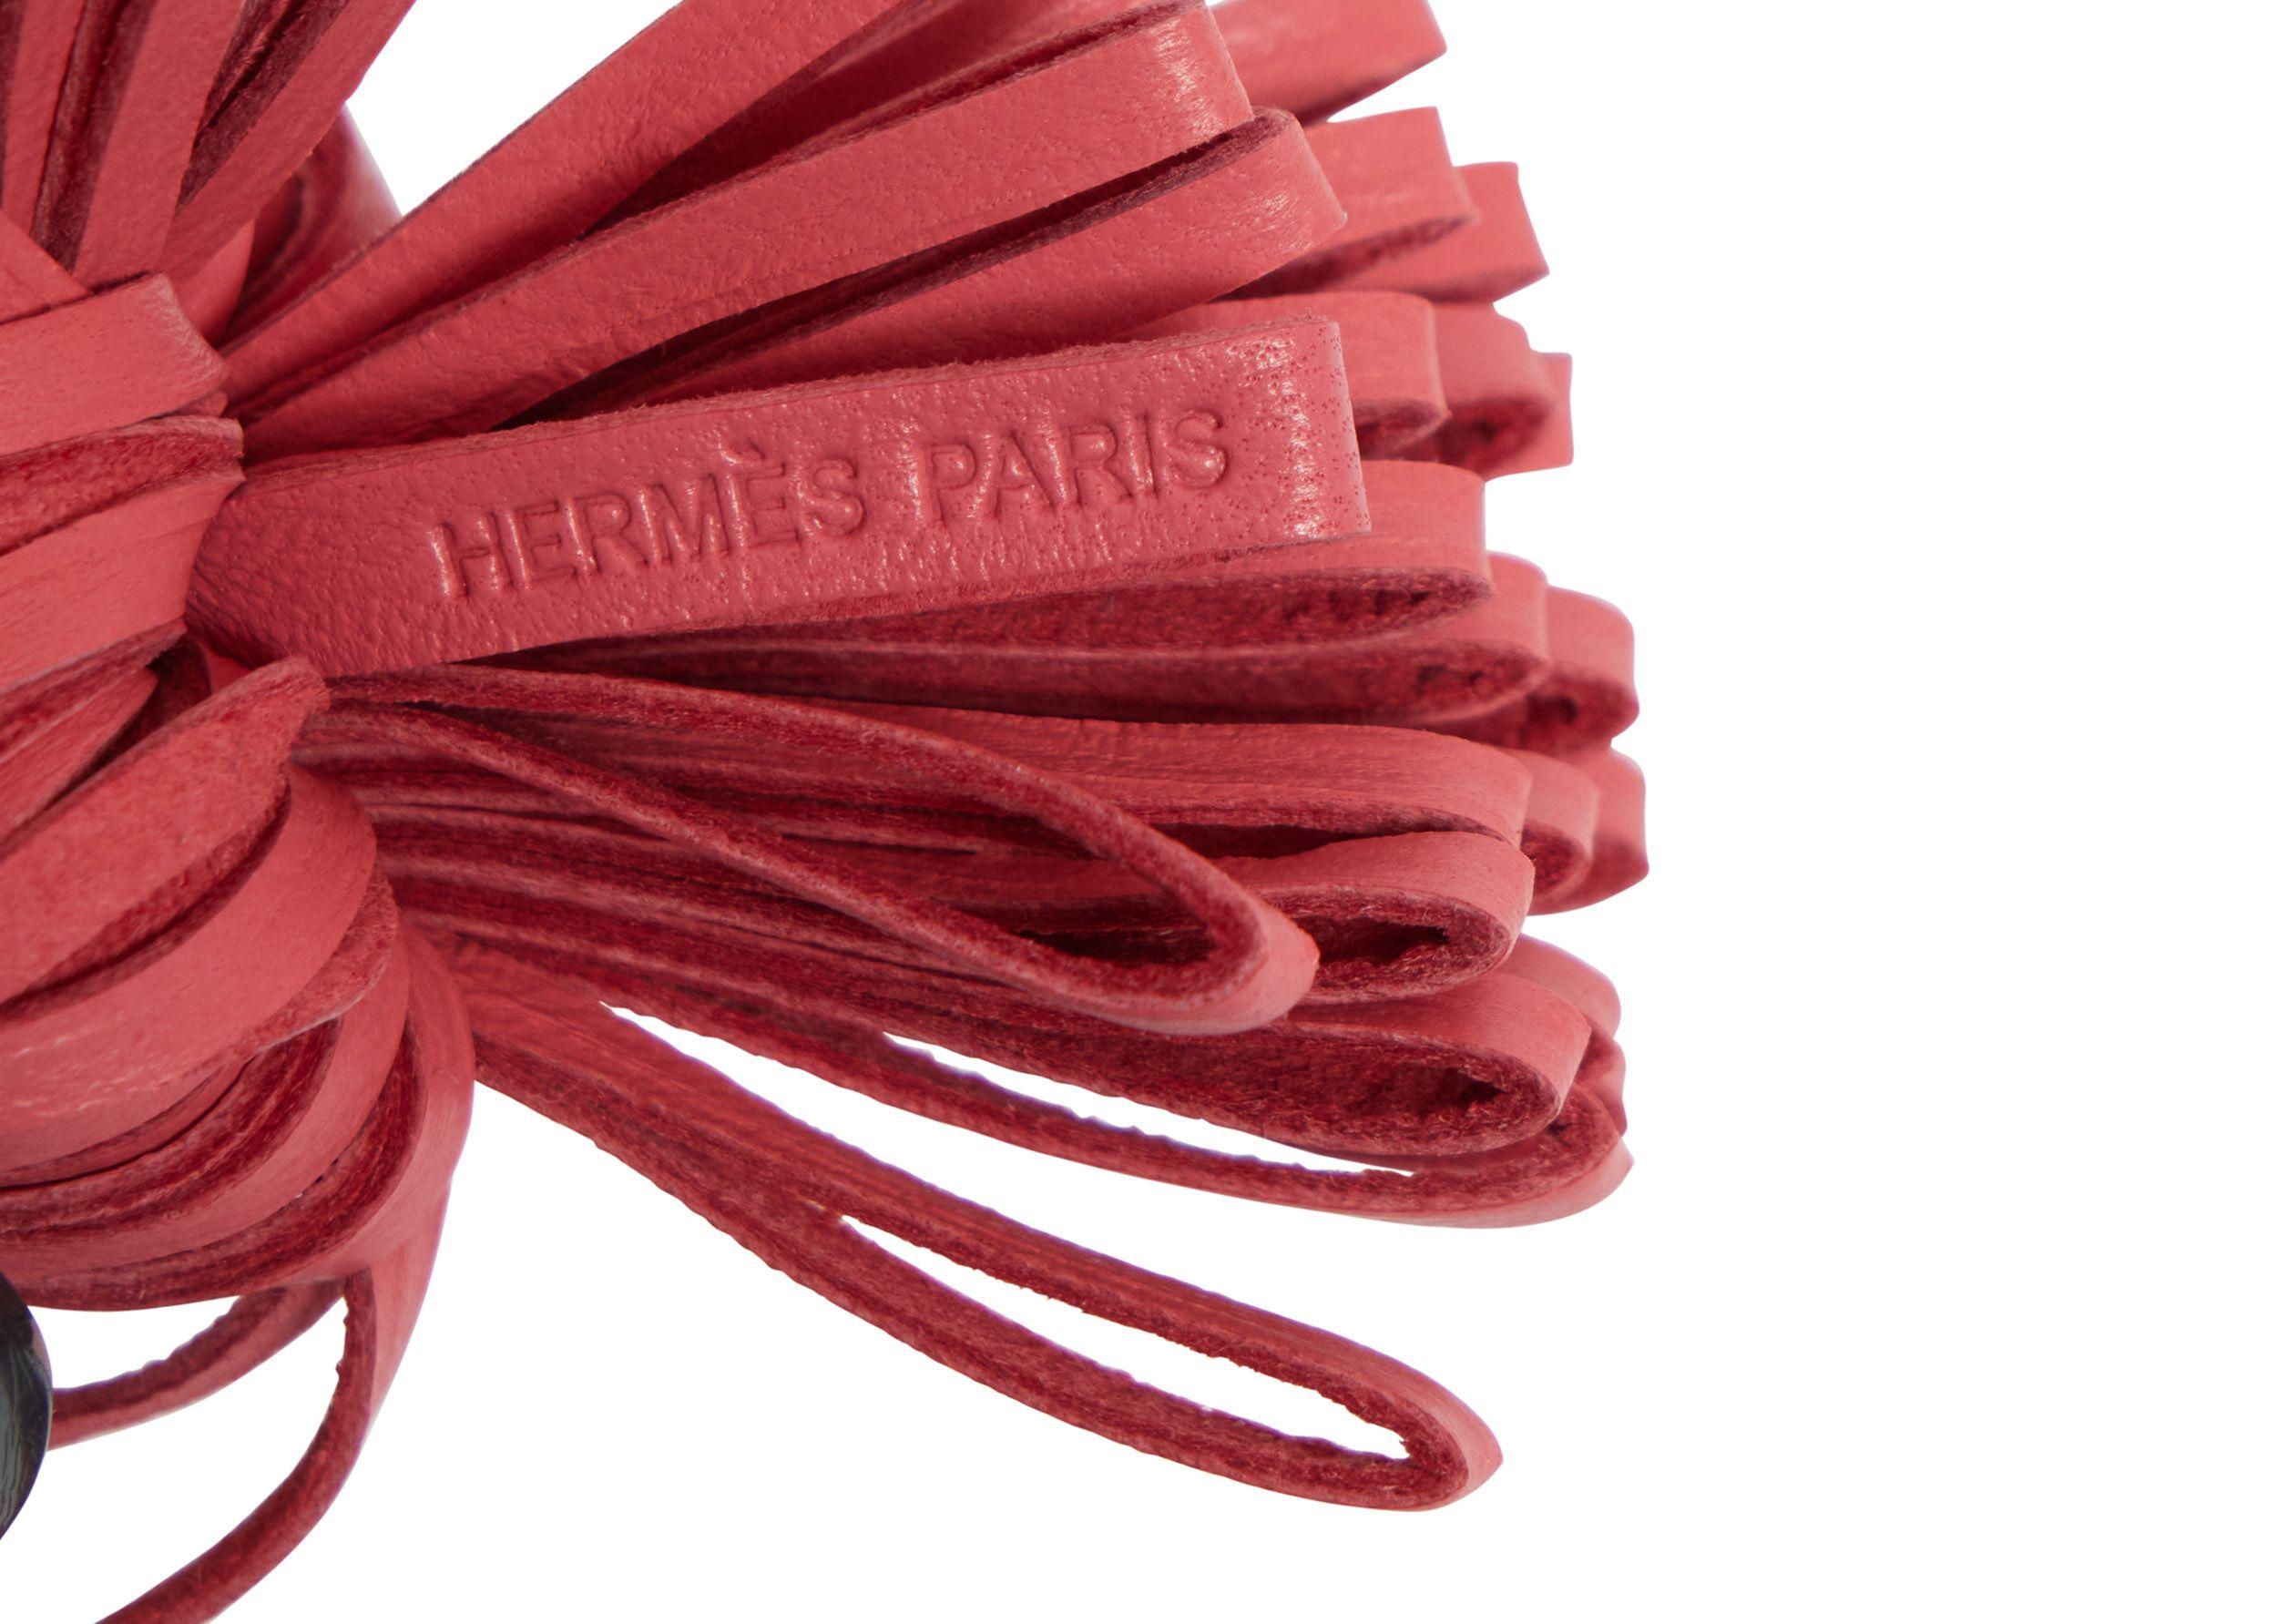 Hermès Double Carmen Bag Charm In New Condition For Sale In West Hollywood, CA